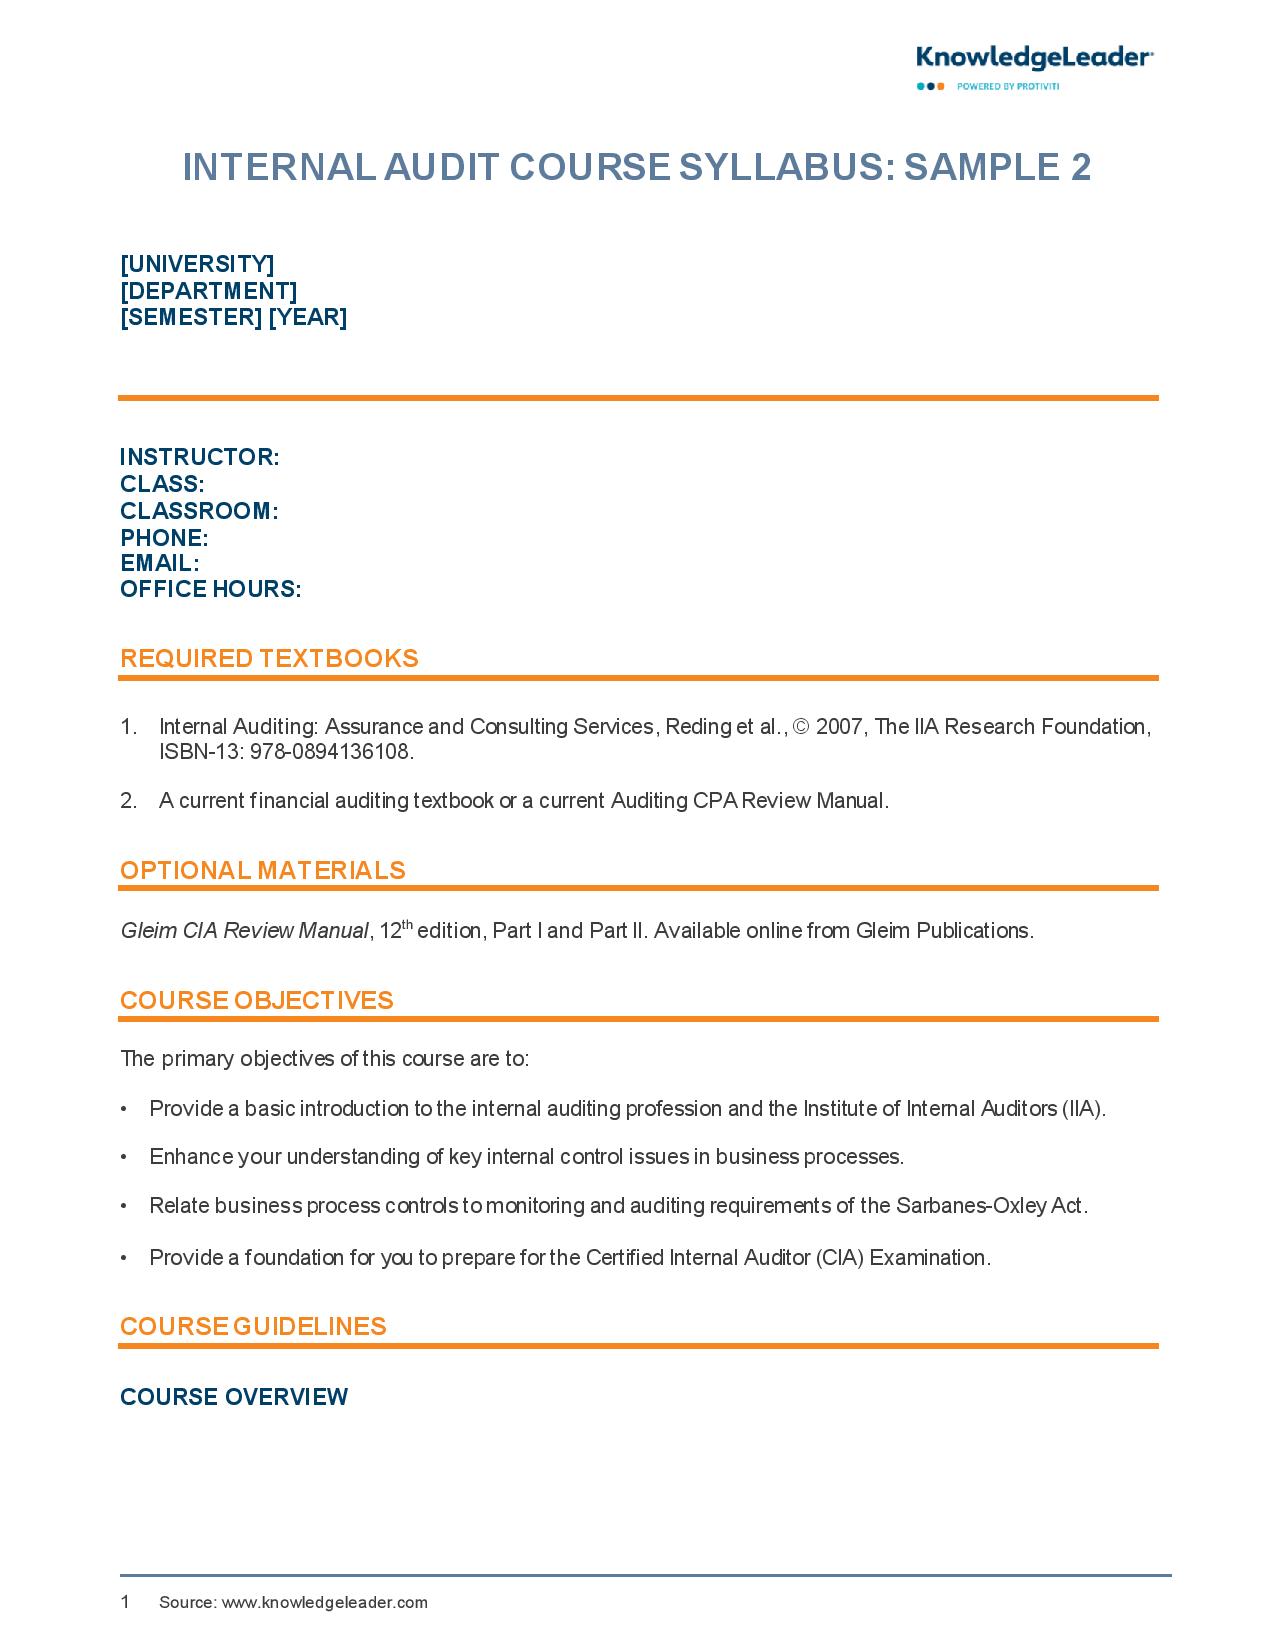 Screenshot of the first page of Internal Audit Course Syllabus Sample 2